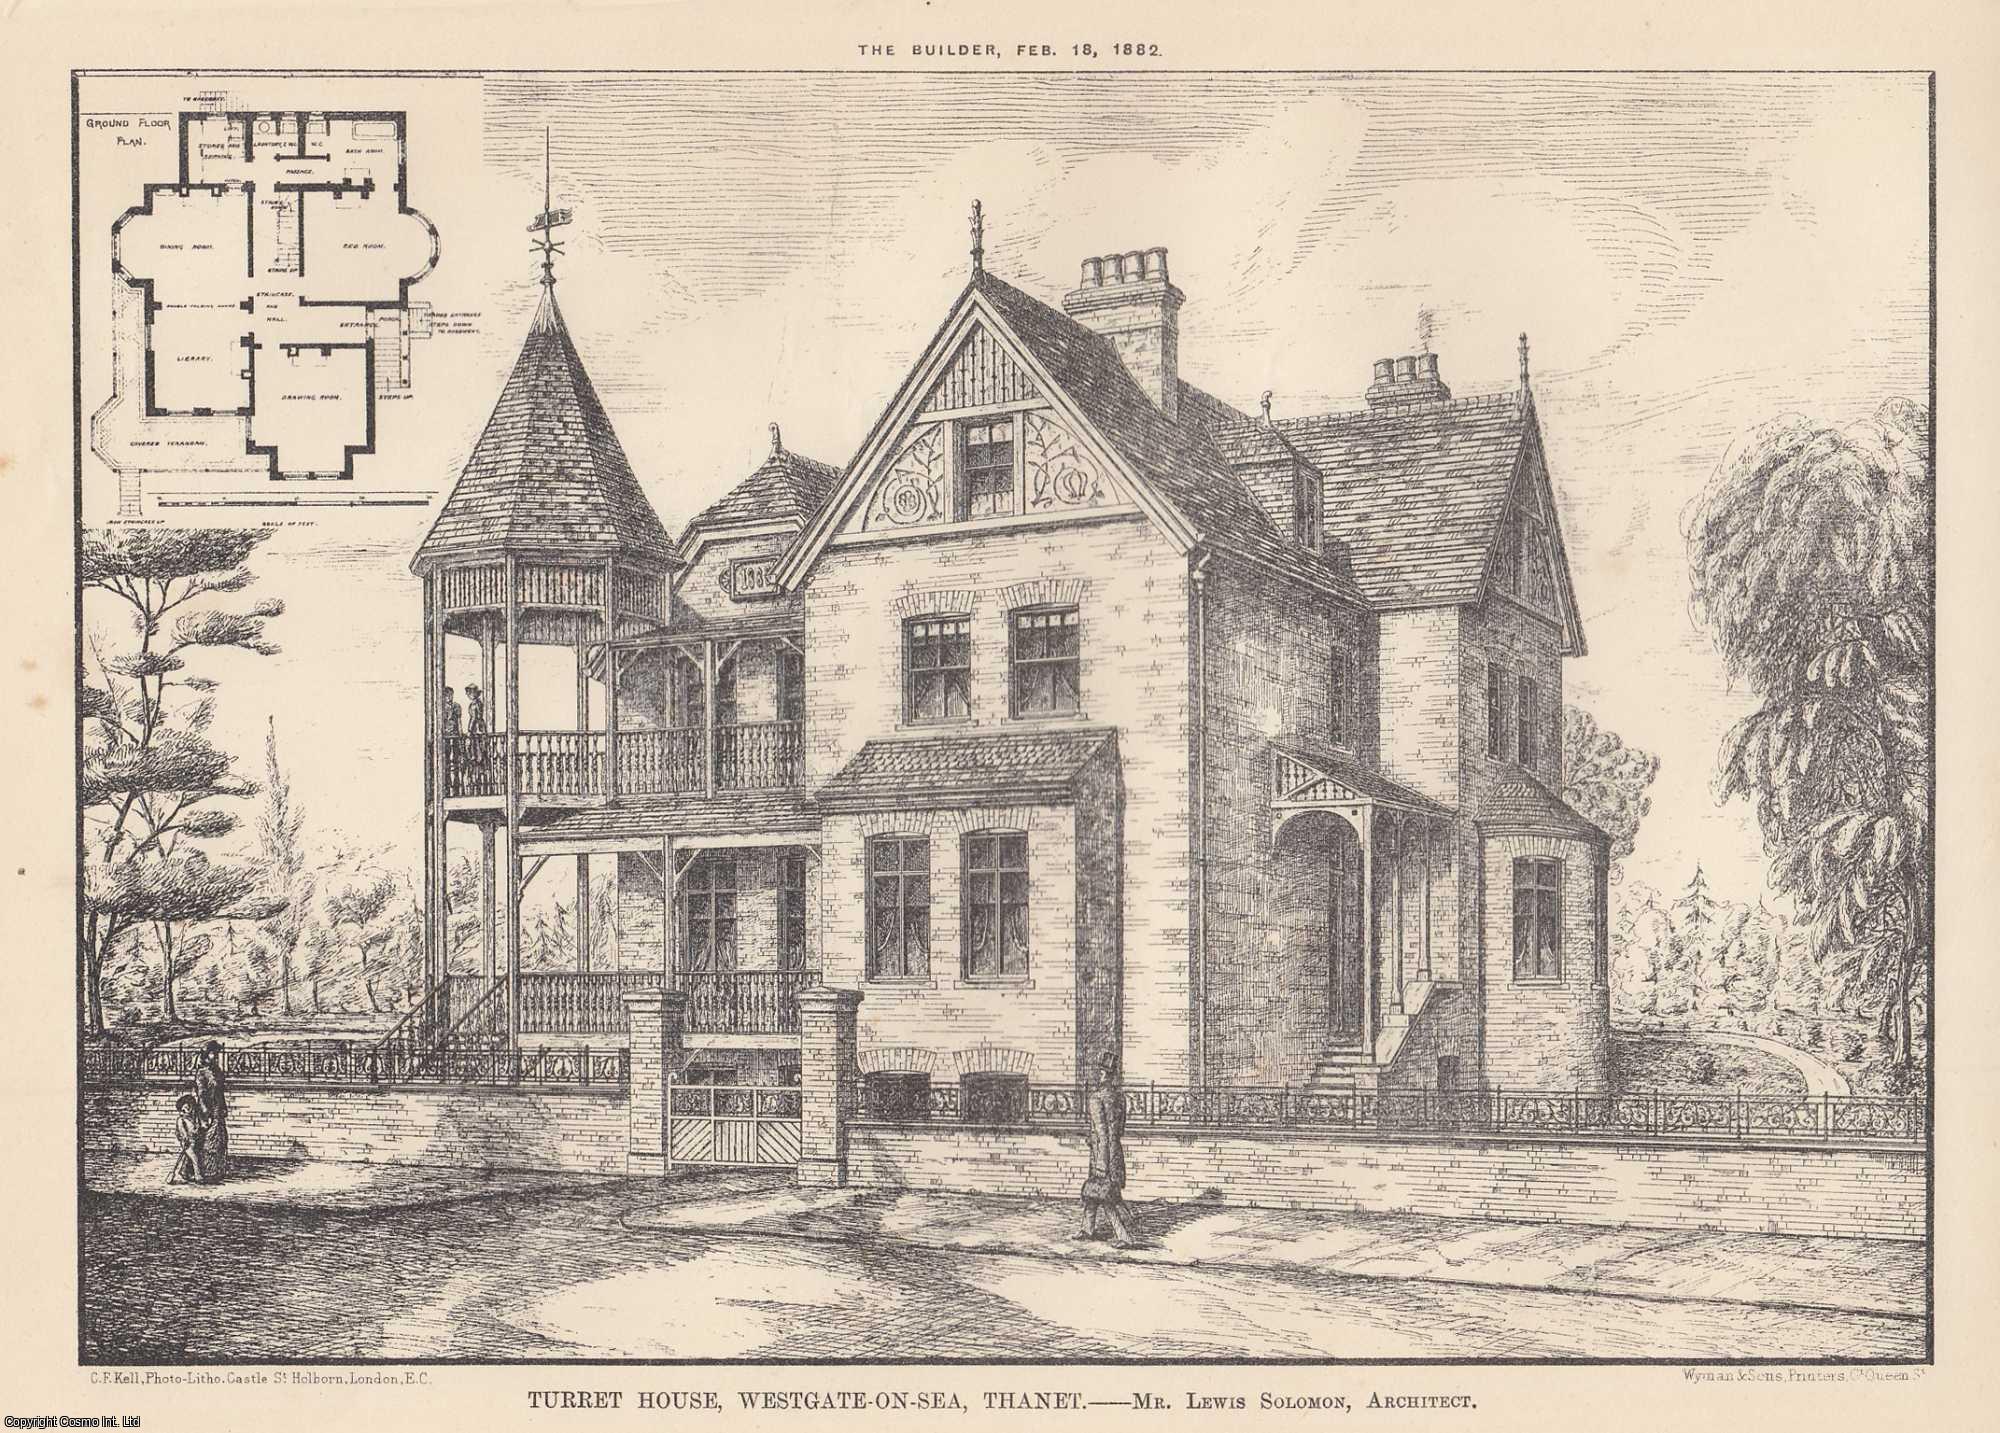 HOUSE, WESTGATE-ON-SEA, THANET - 1882 : Turret House, Westgate-on-Sea, Thanet. Lewis Solomon, Architect. An original page from The Builder. An Illustrated Weekly Magazine, for the Architect, Engineer, Archaeologist, Constructor, & Art-Lover.